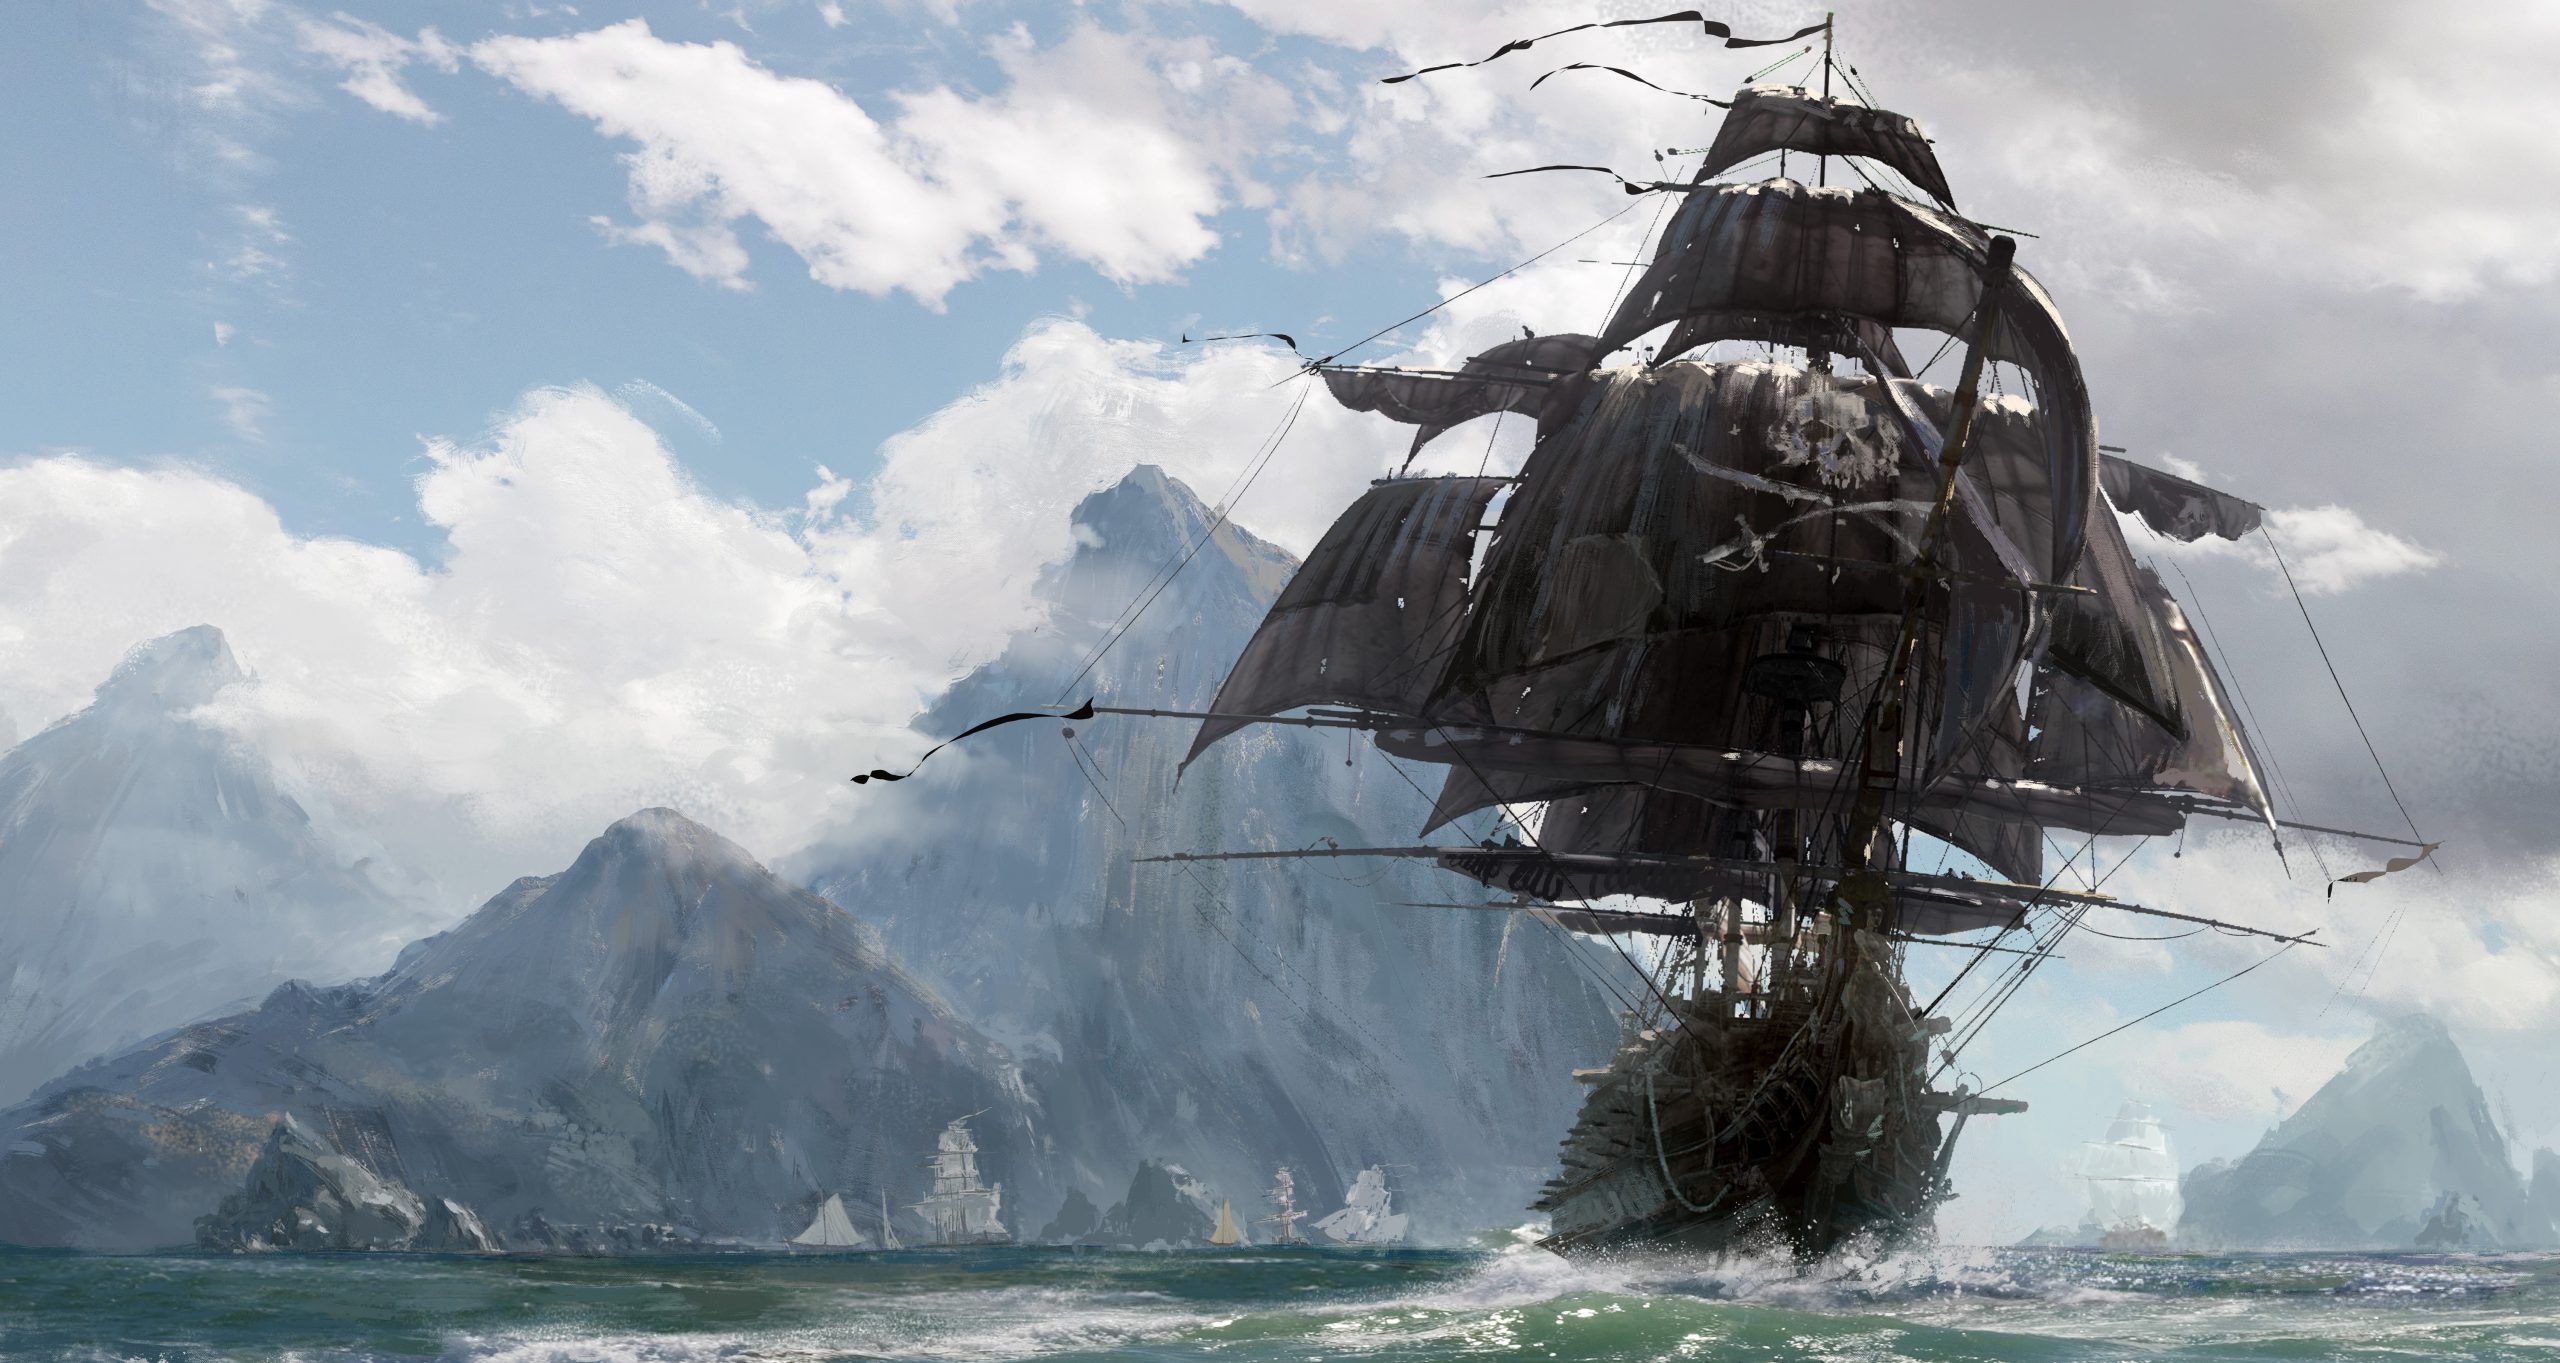 The pirate ship wallpaper 1920x1080 for android - Pirate